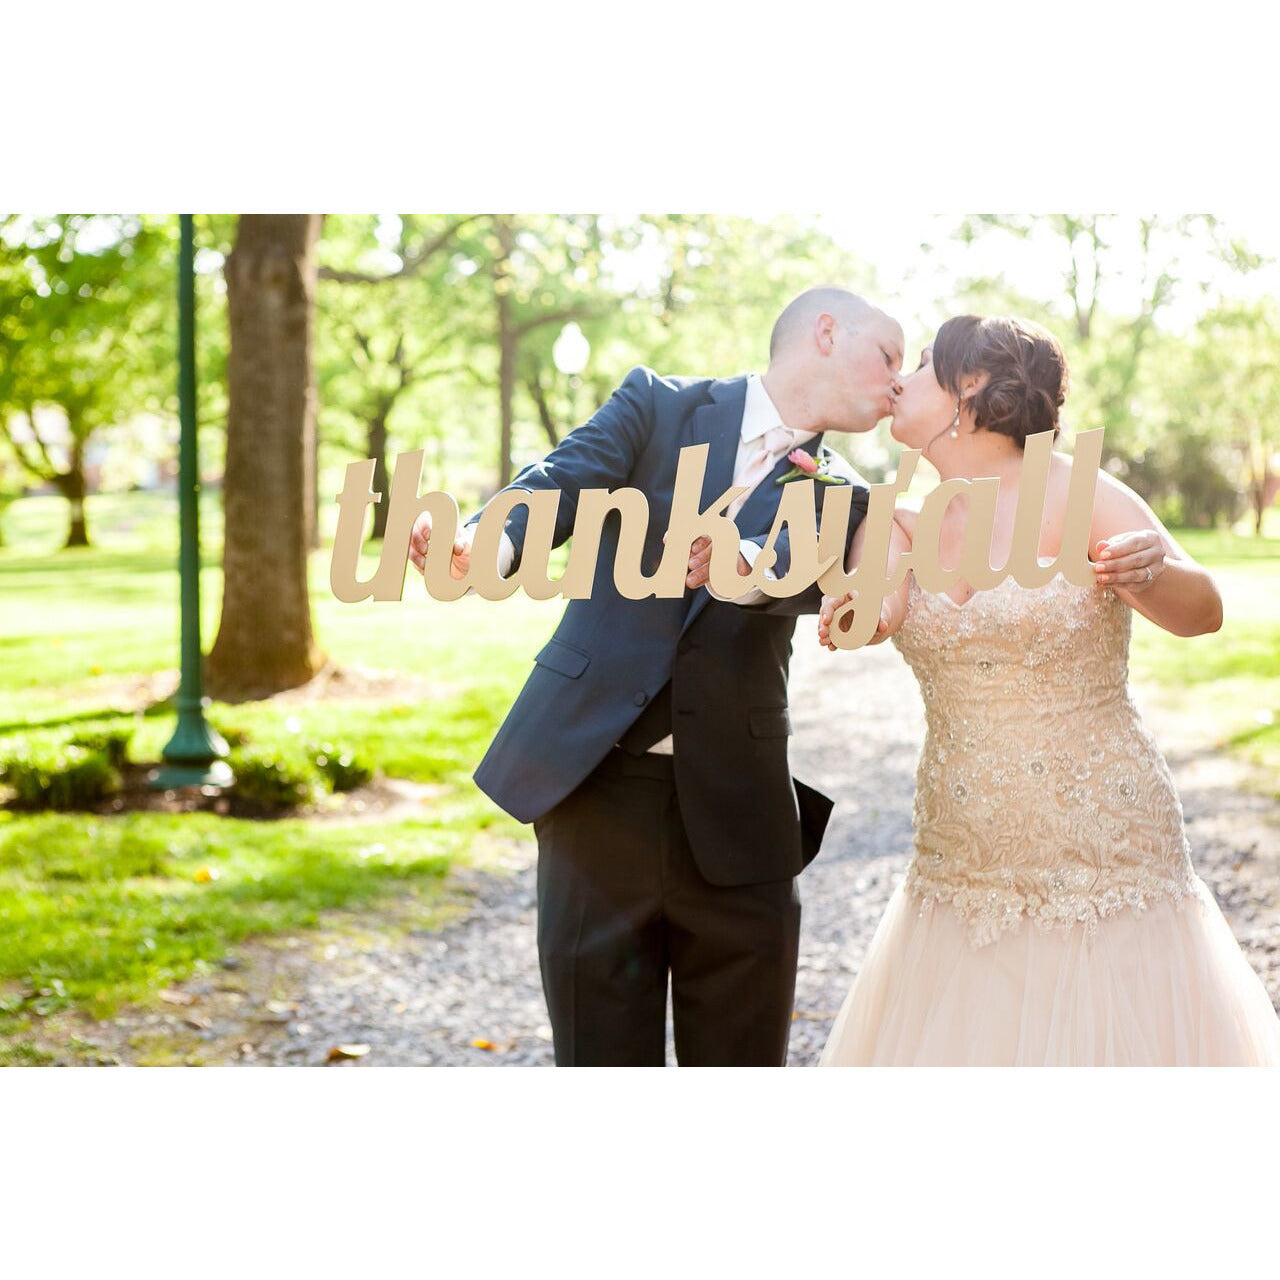 "Thanks Y'all" Sign Wedding Photo Prop - Wedding Decor Gifts